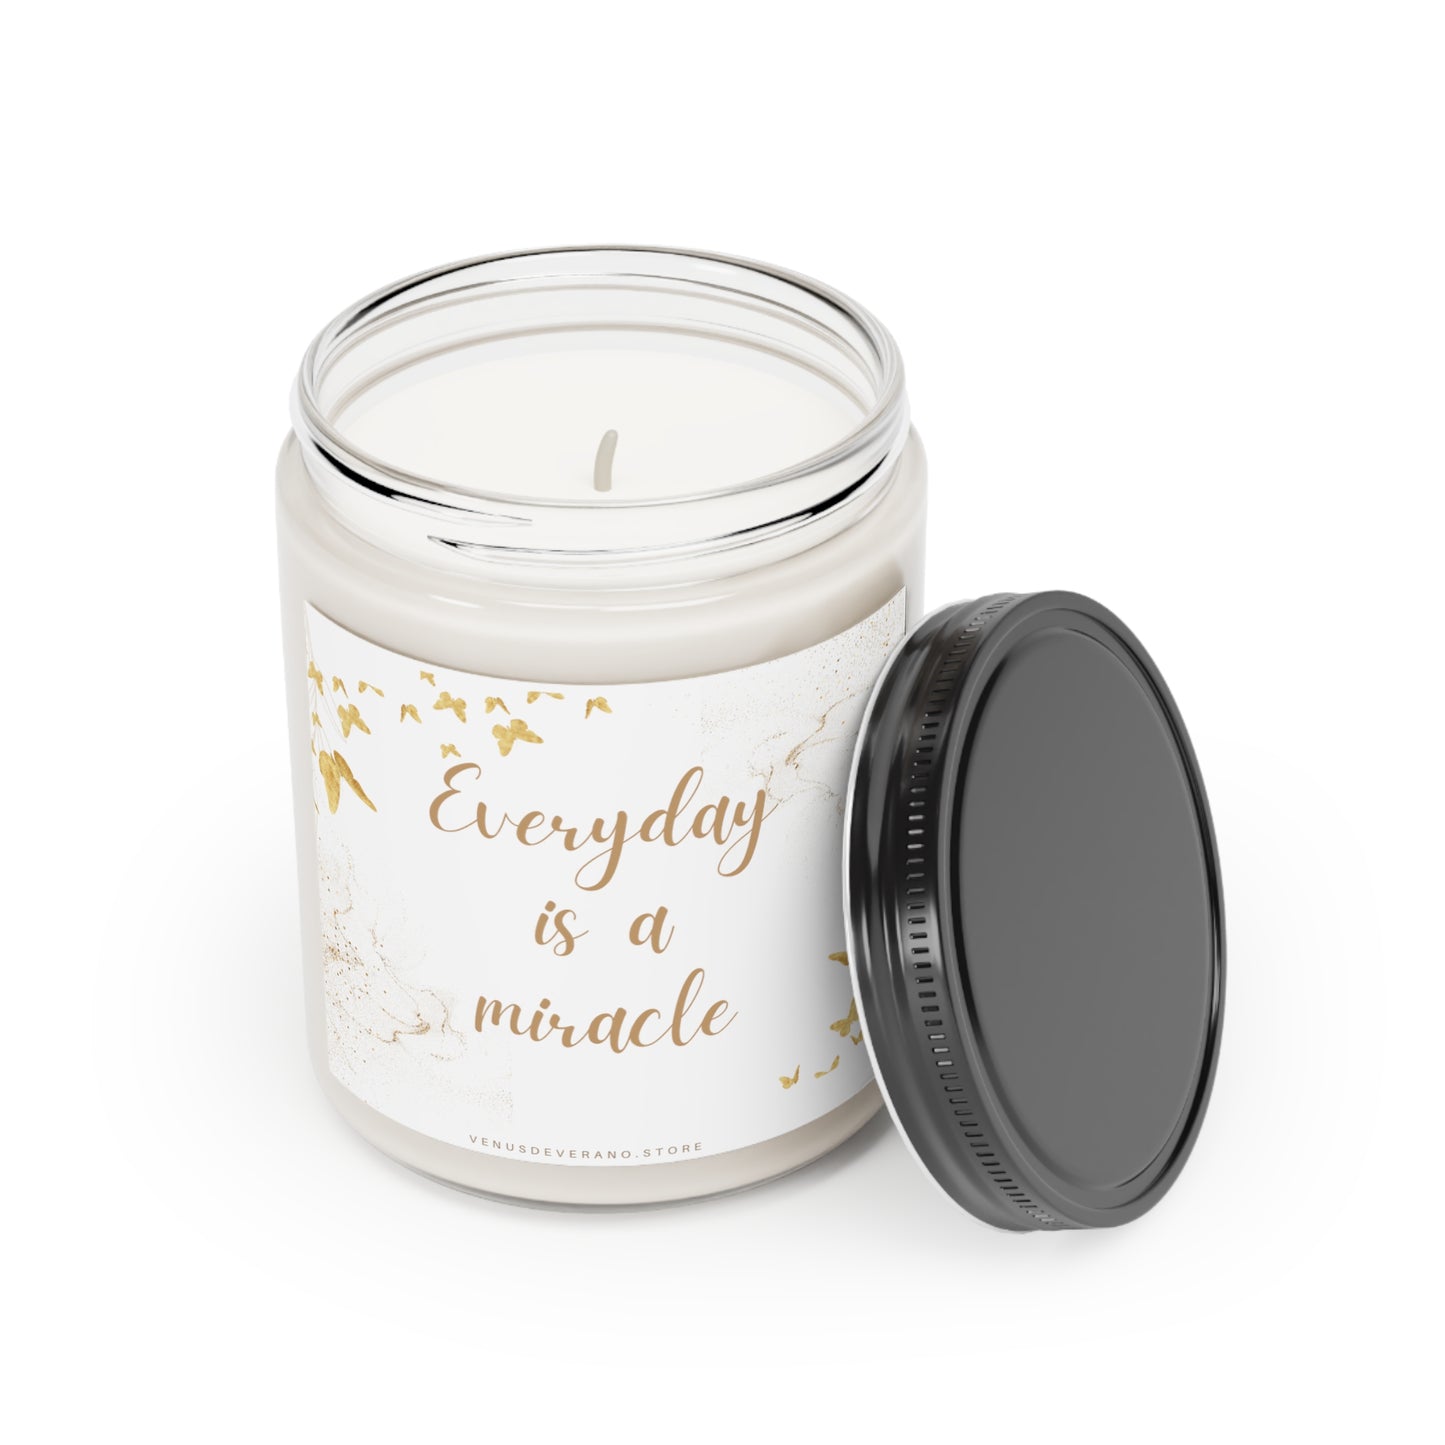 Scented Candle, 9oz - Everyday is a MIRACLE - Made from vegan soy coconut wax, hand-poured | 2 ambrosial fragrances available, Cinnamon Stick and Vanilla.